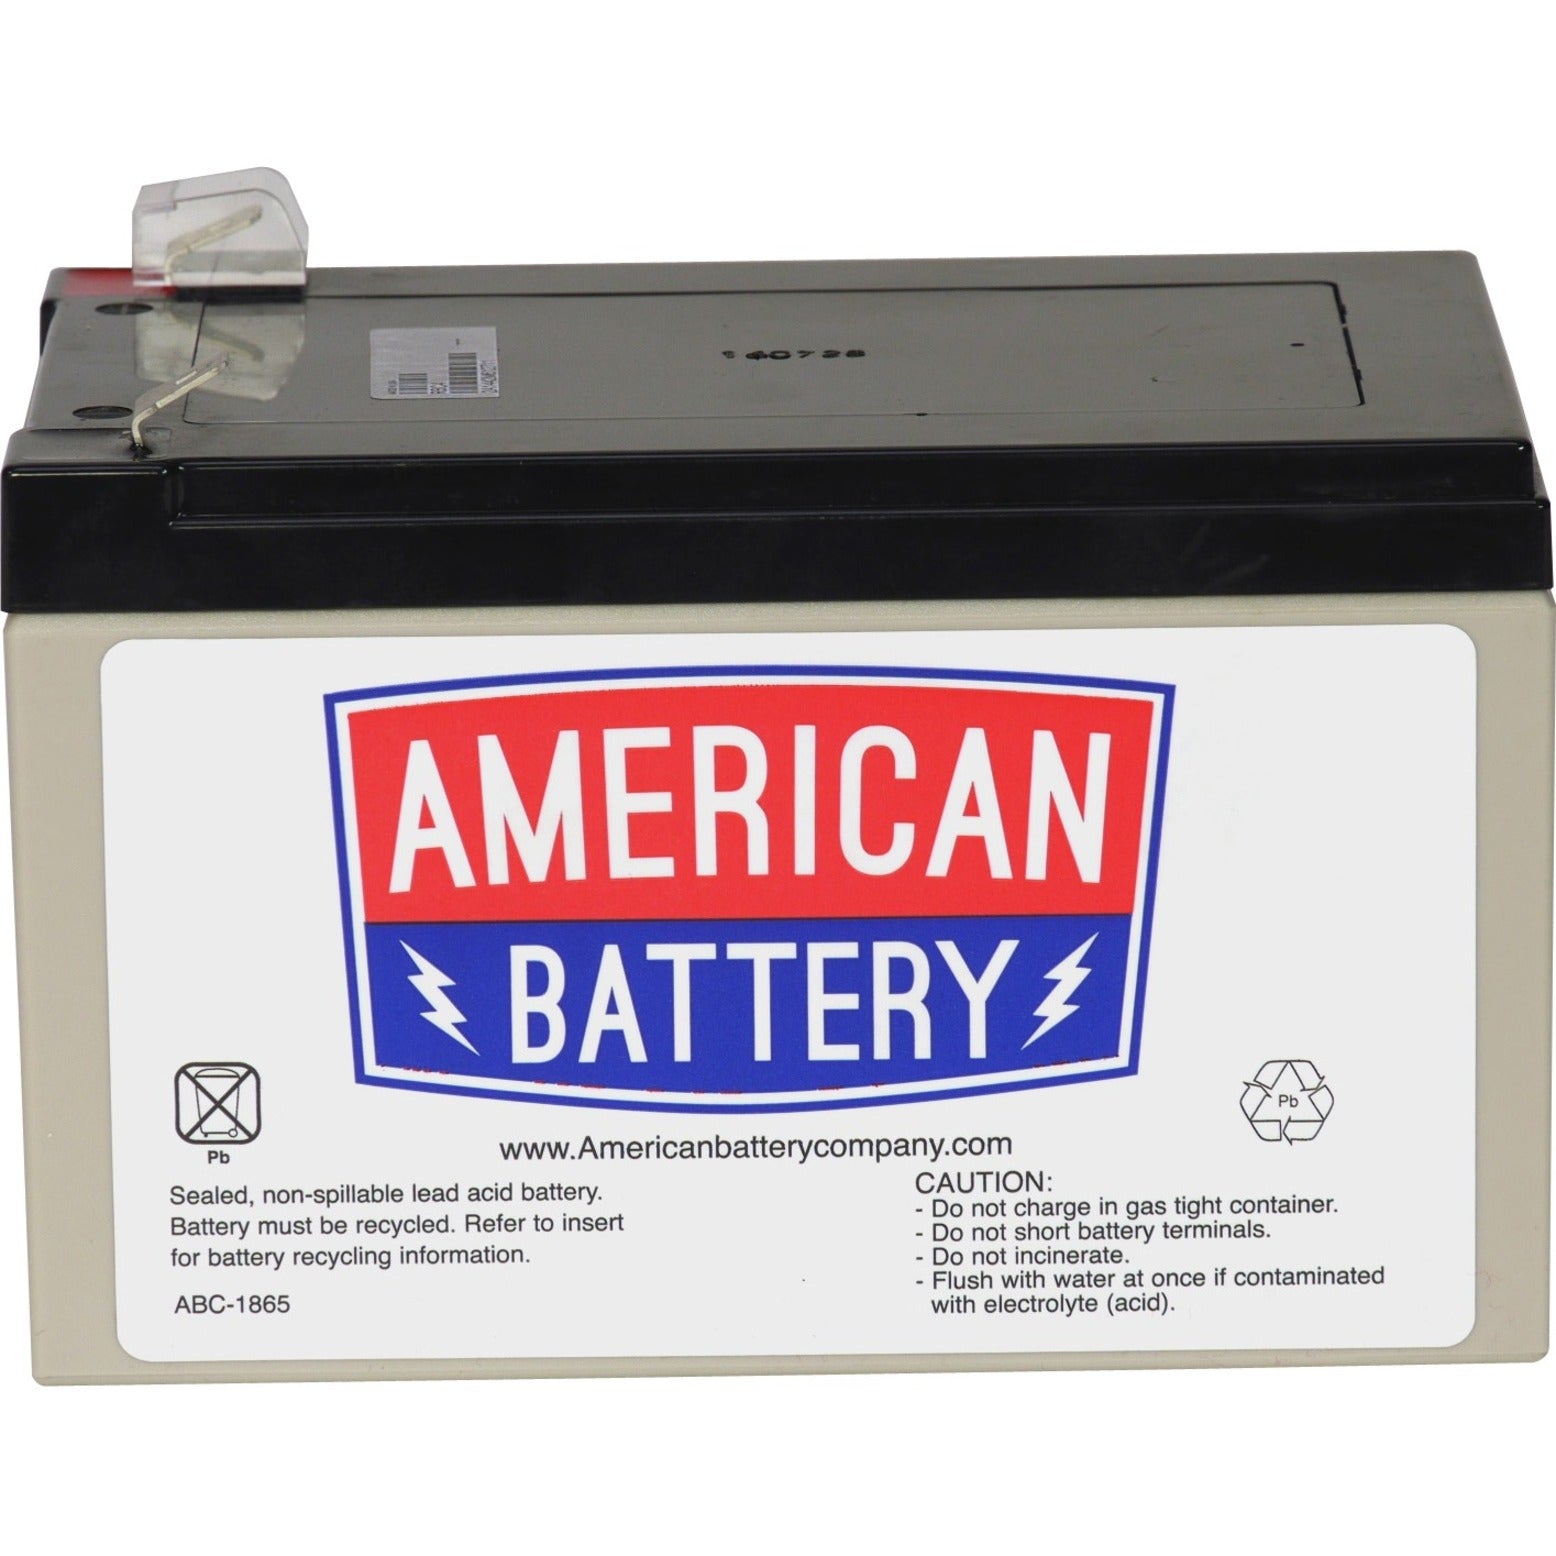 ABC RBC4 Replacement Battery Cartridge, 2 Year Warranty, Hot Swappable, 12V DC, 12000mAh